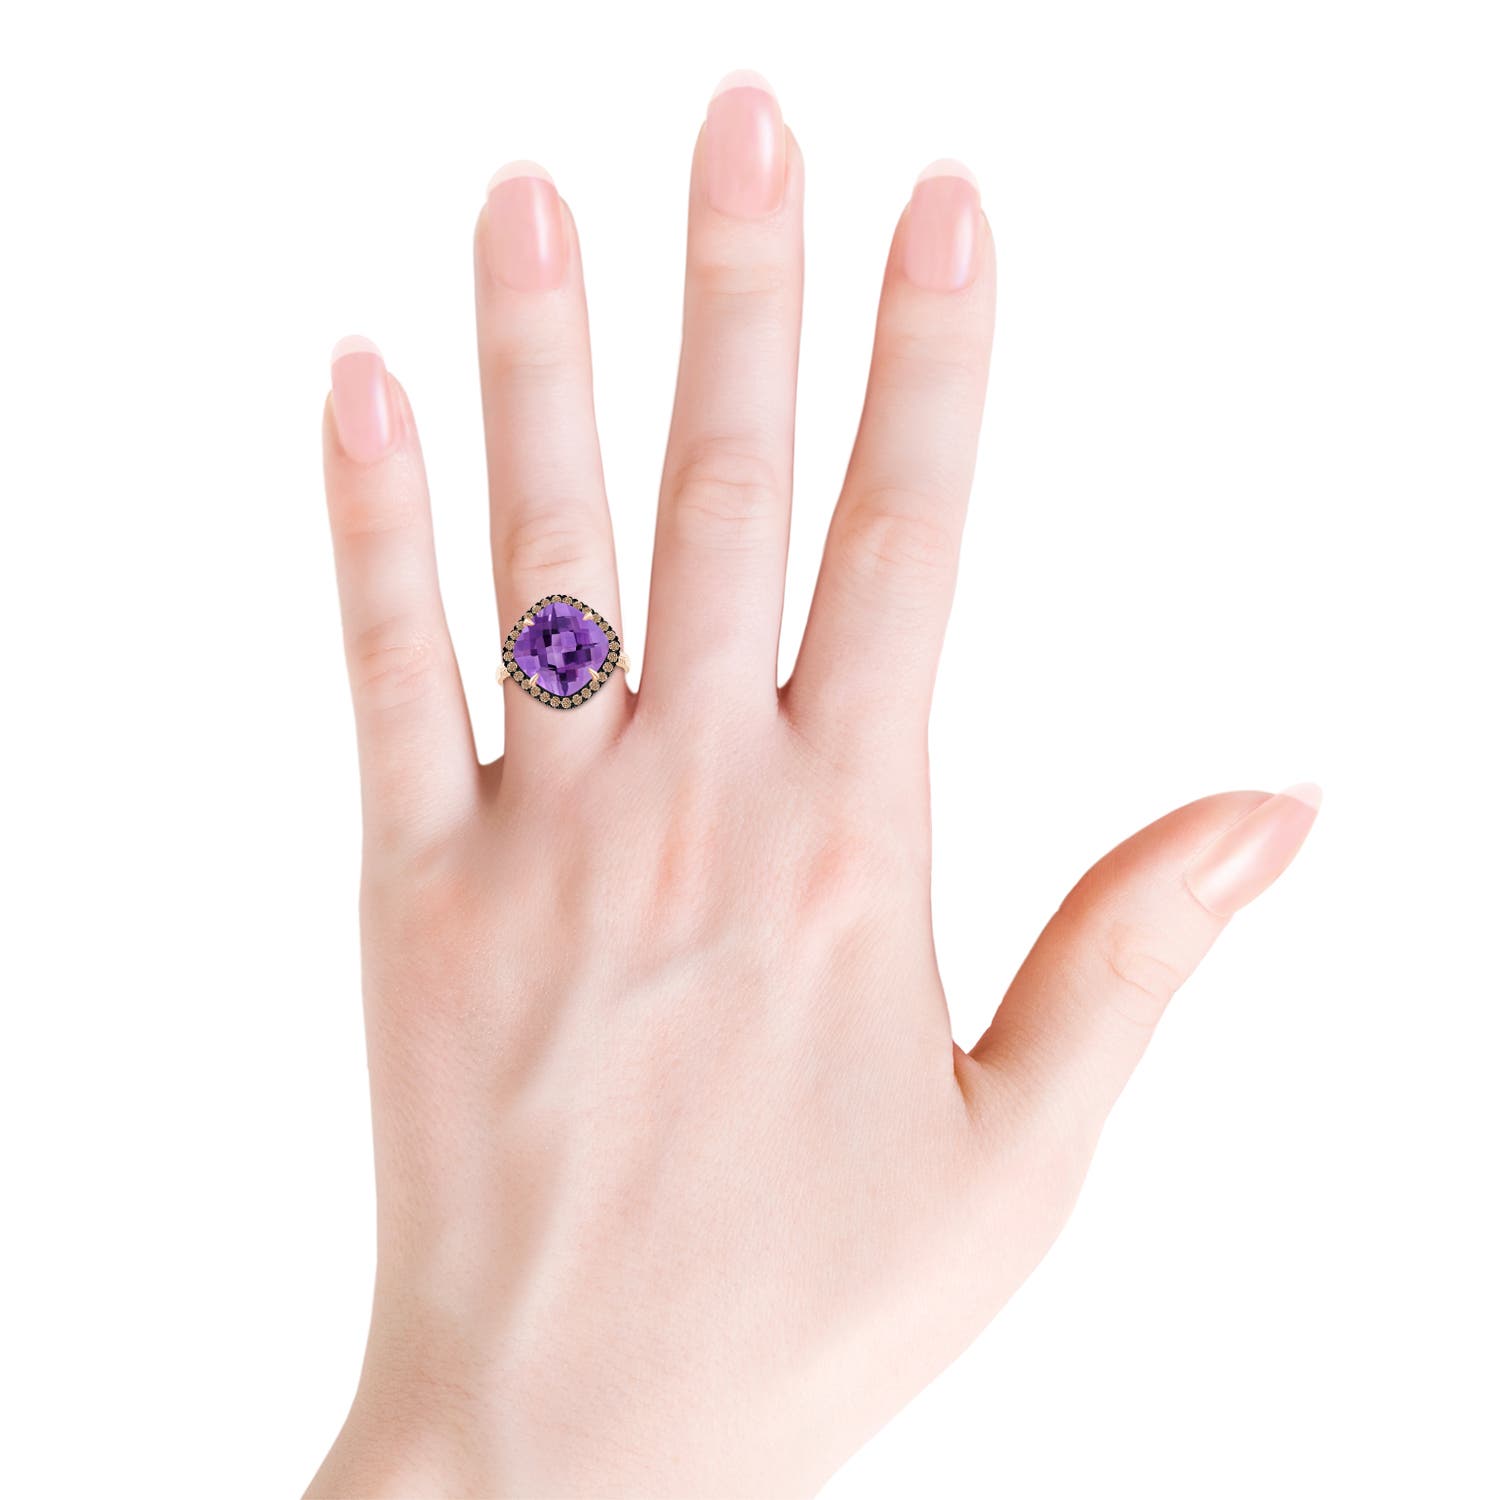 AA - Amethyst / 4.98 CT / 14 KT Rose Gold